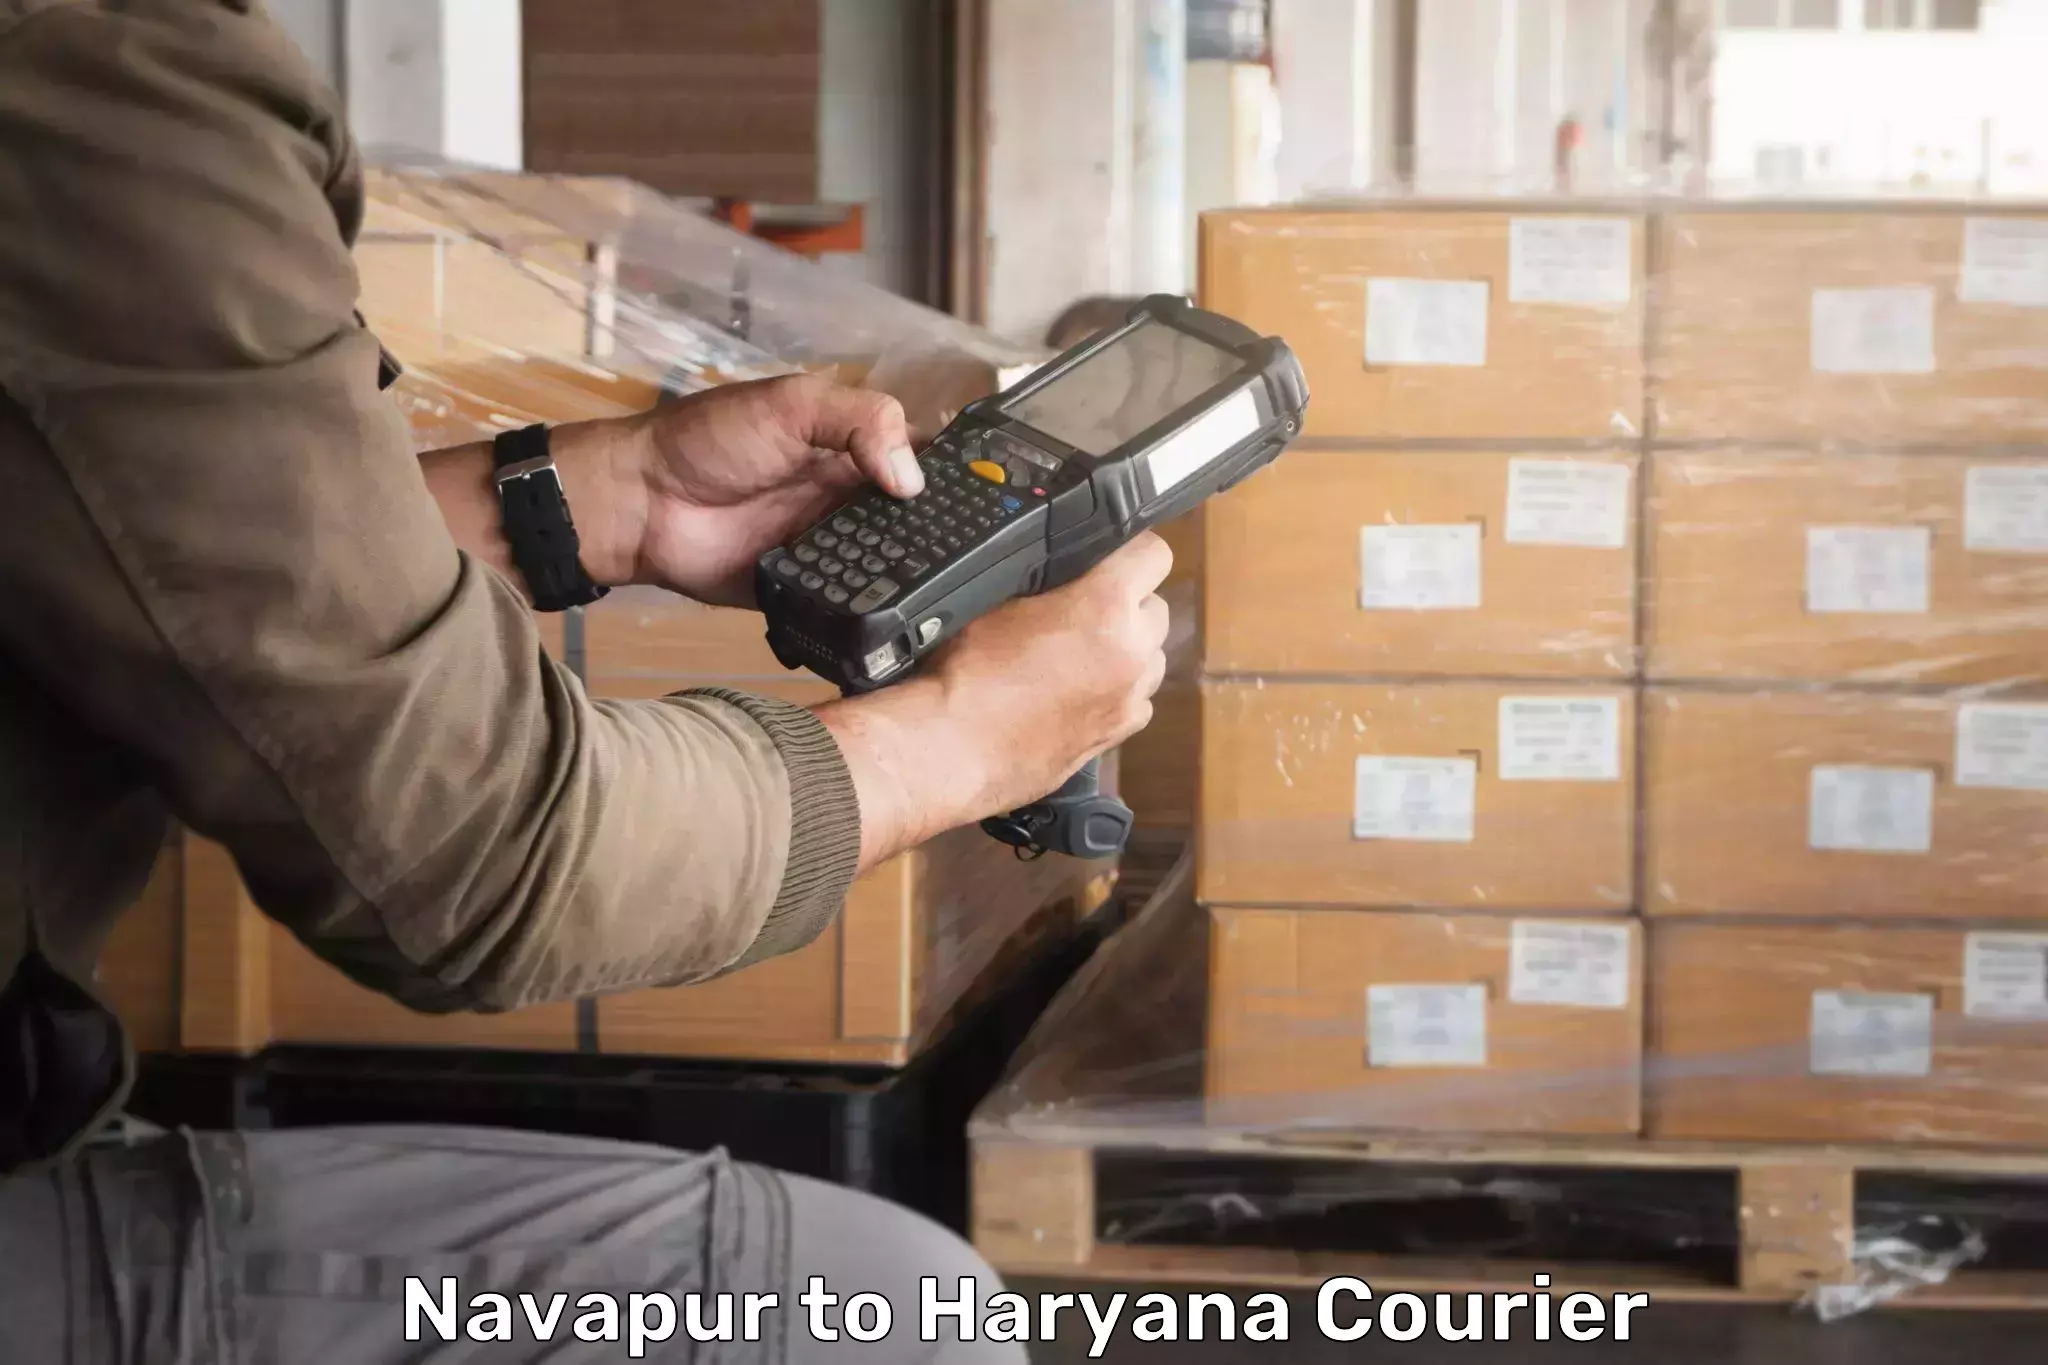 International courier networks Navapur to Pinjore